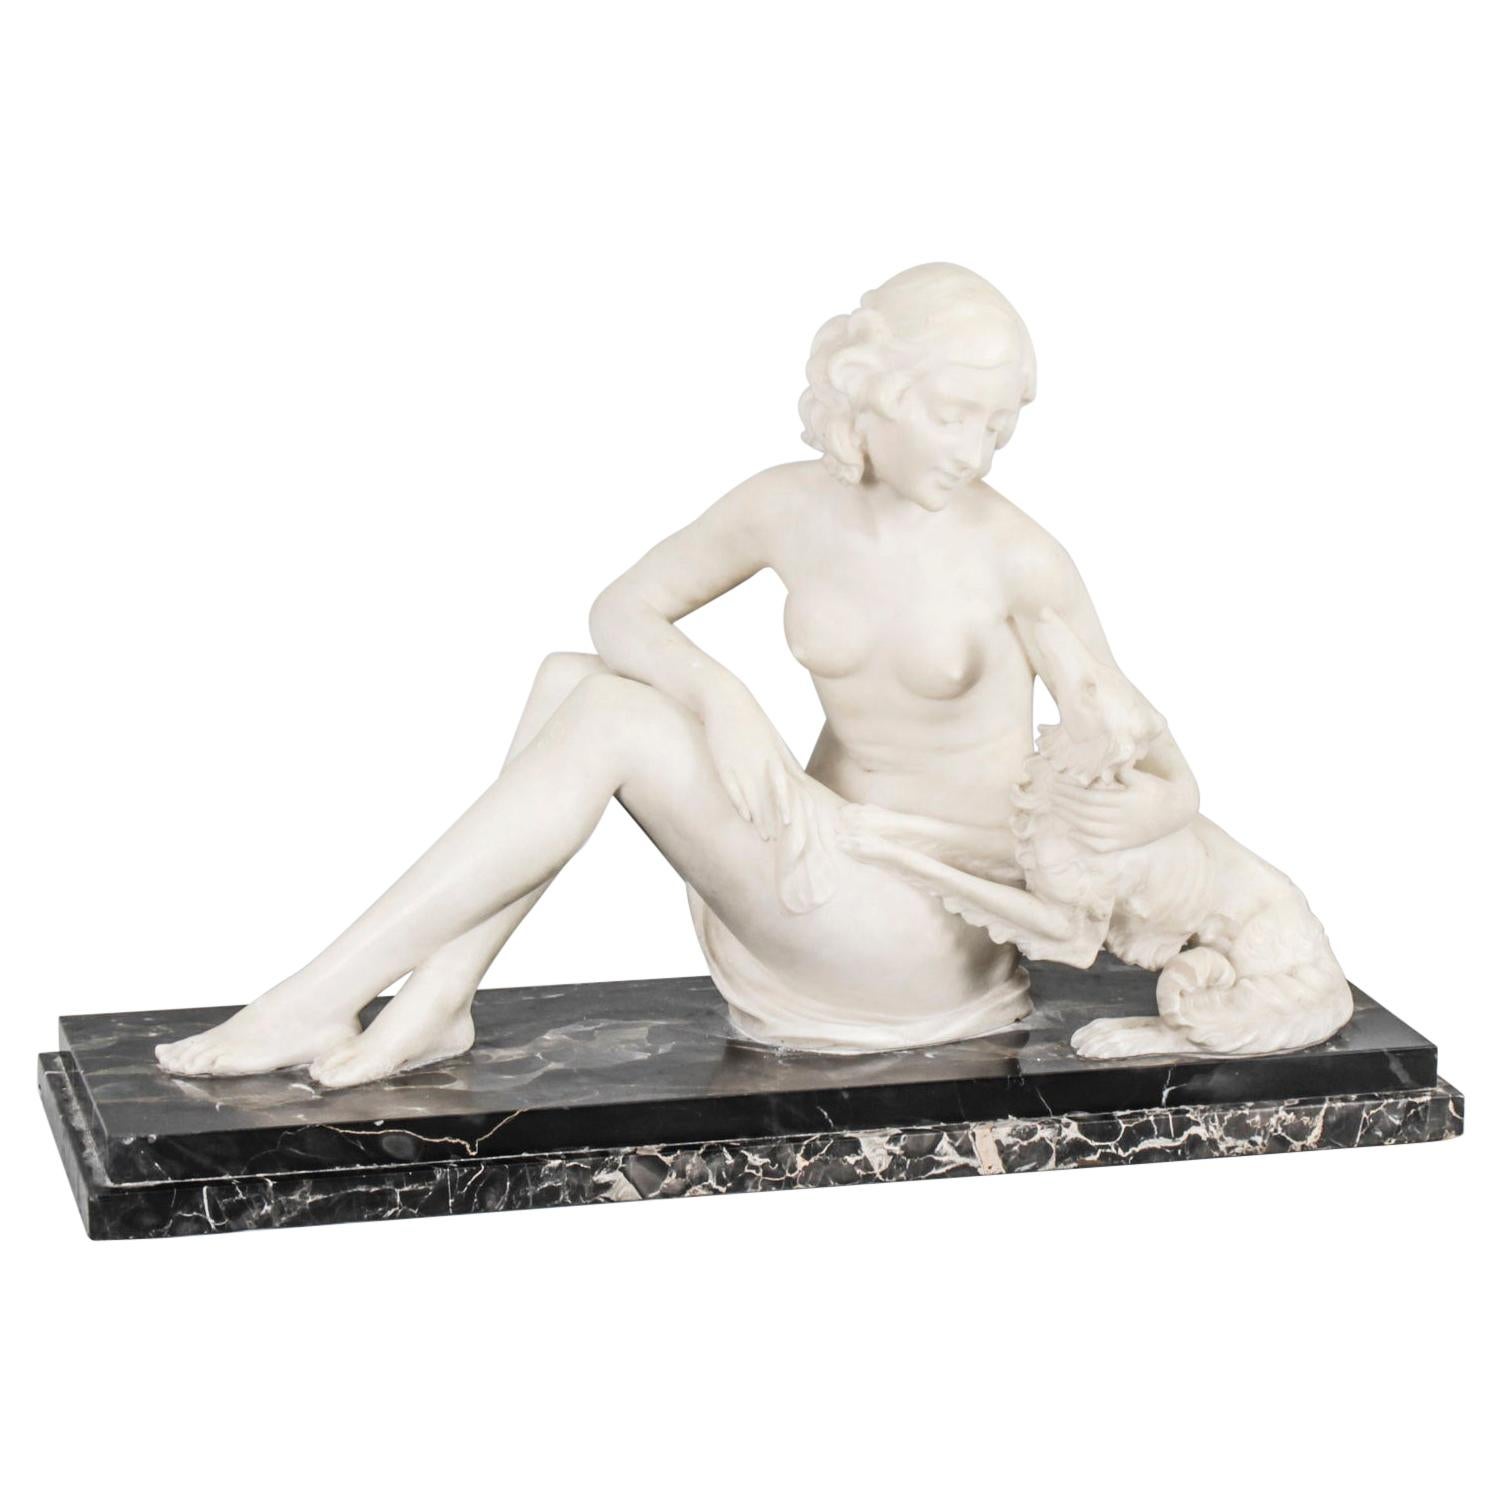 Antique French Art Deco Carrara Marble Sculpture of Reclining Maiden, 1920s